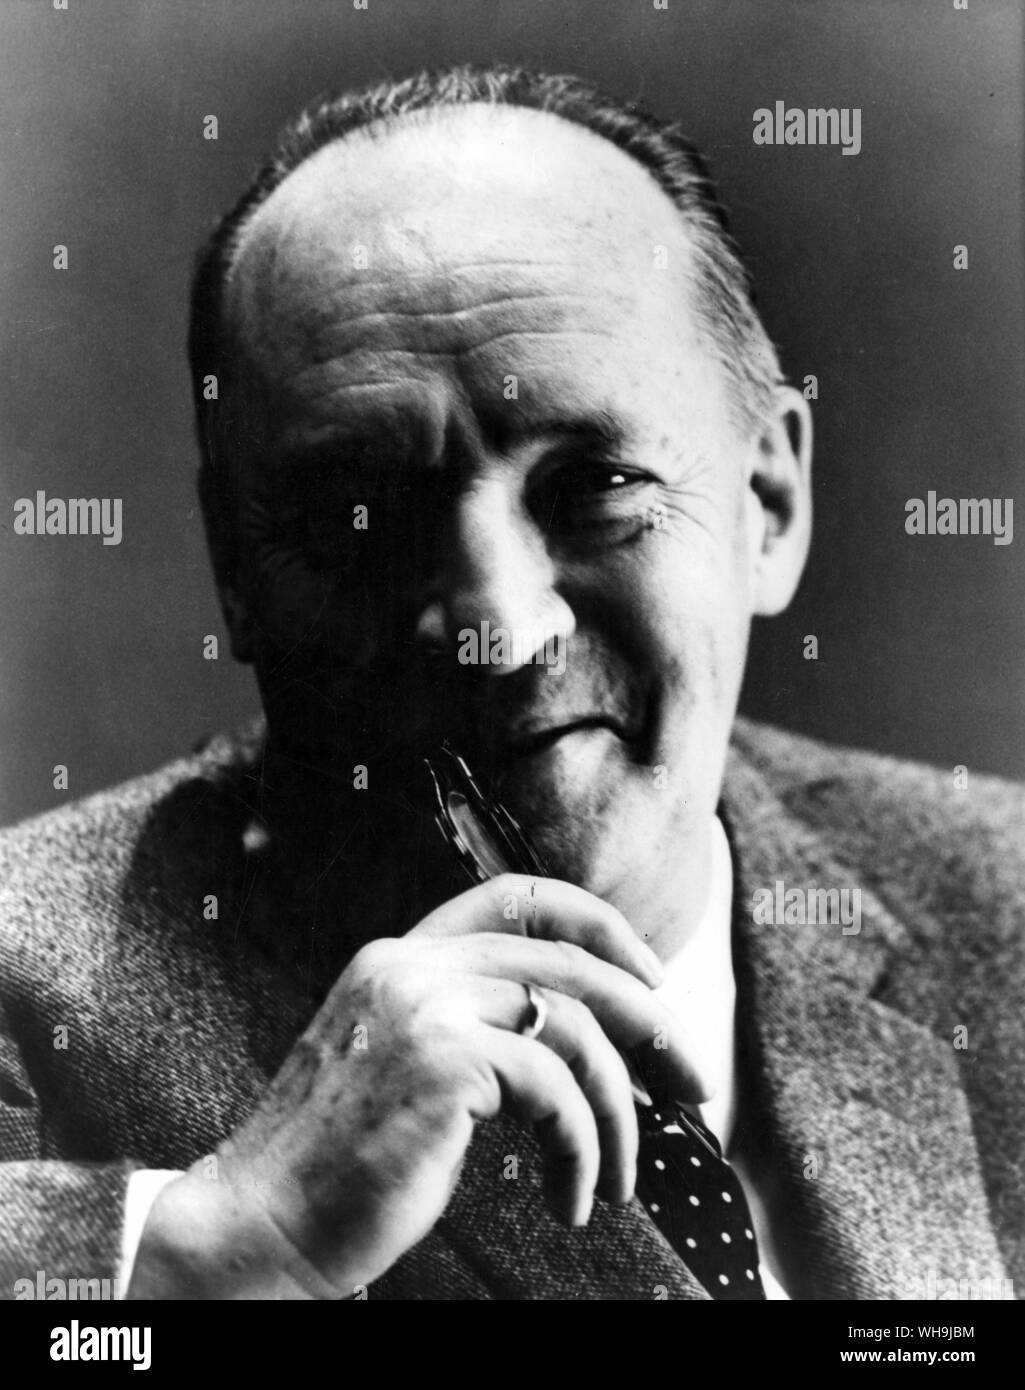 Vladimir Nabokov (1899-1977), US writer. He left his native Russia in 1917 and began writing in English in the 1940s. Stock Photo